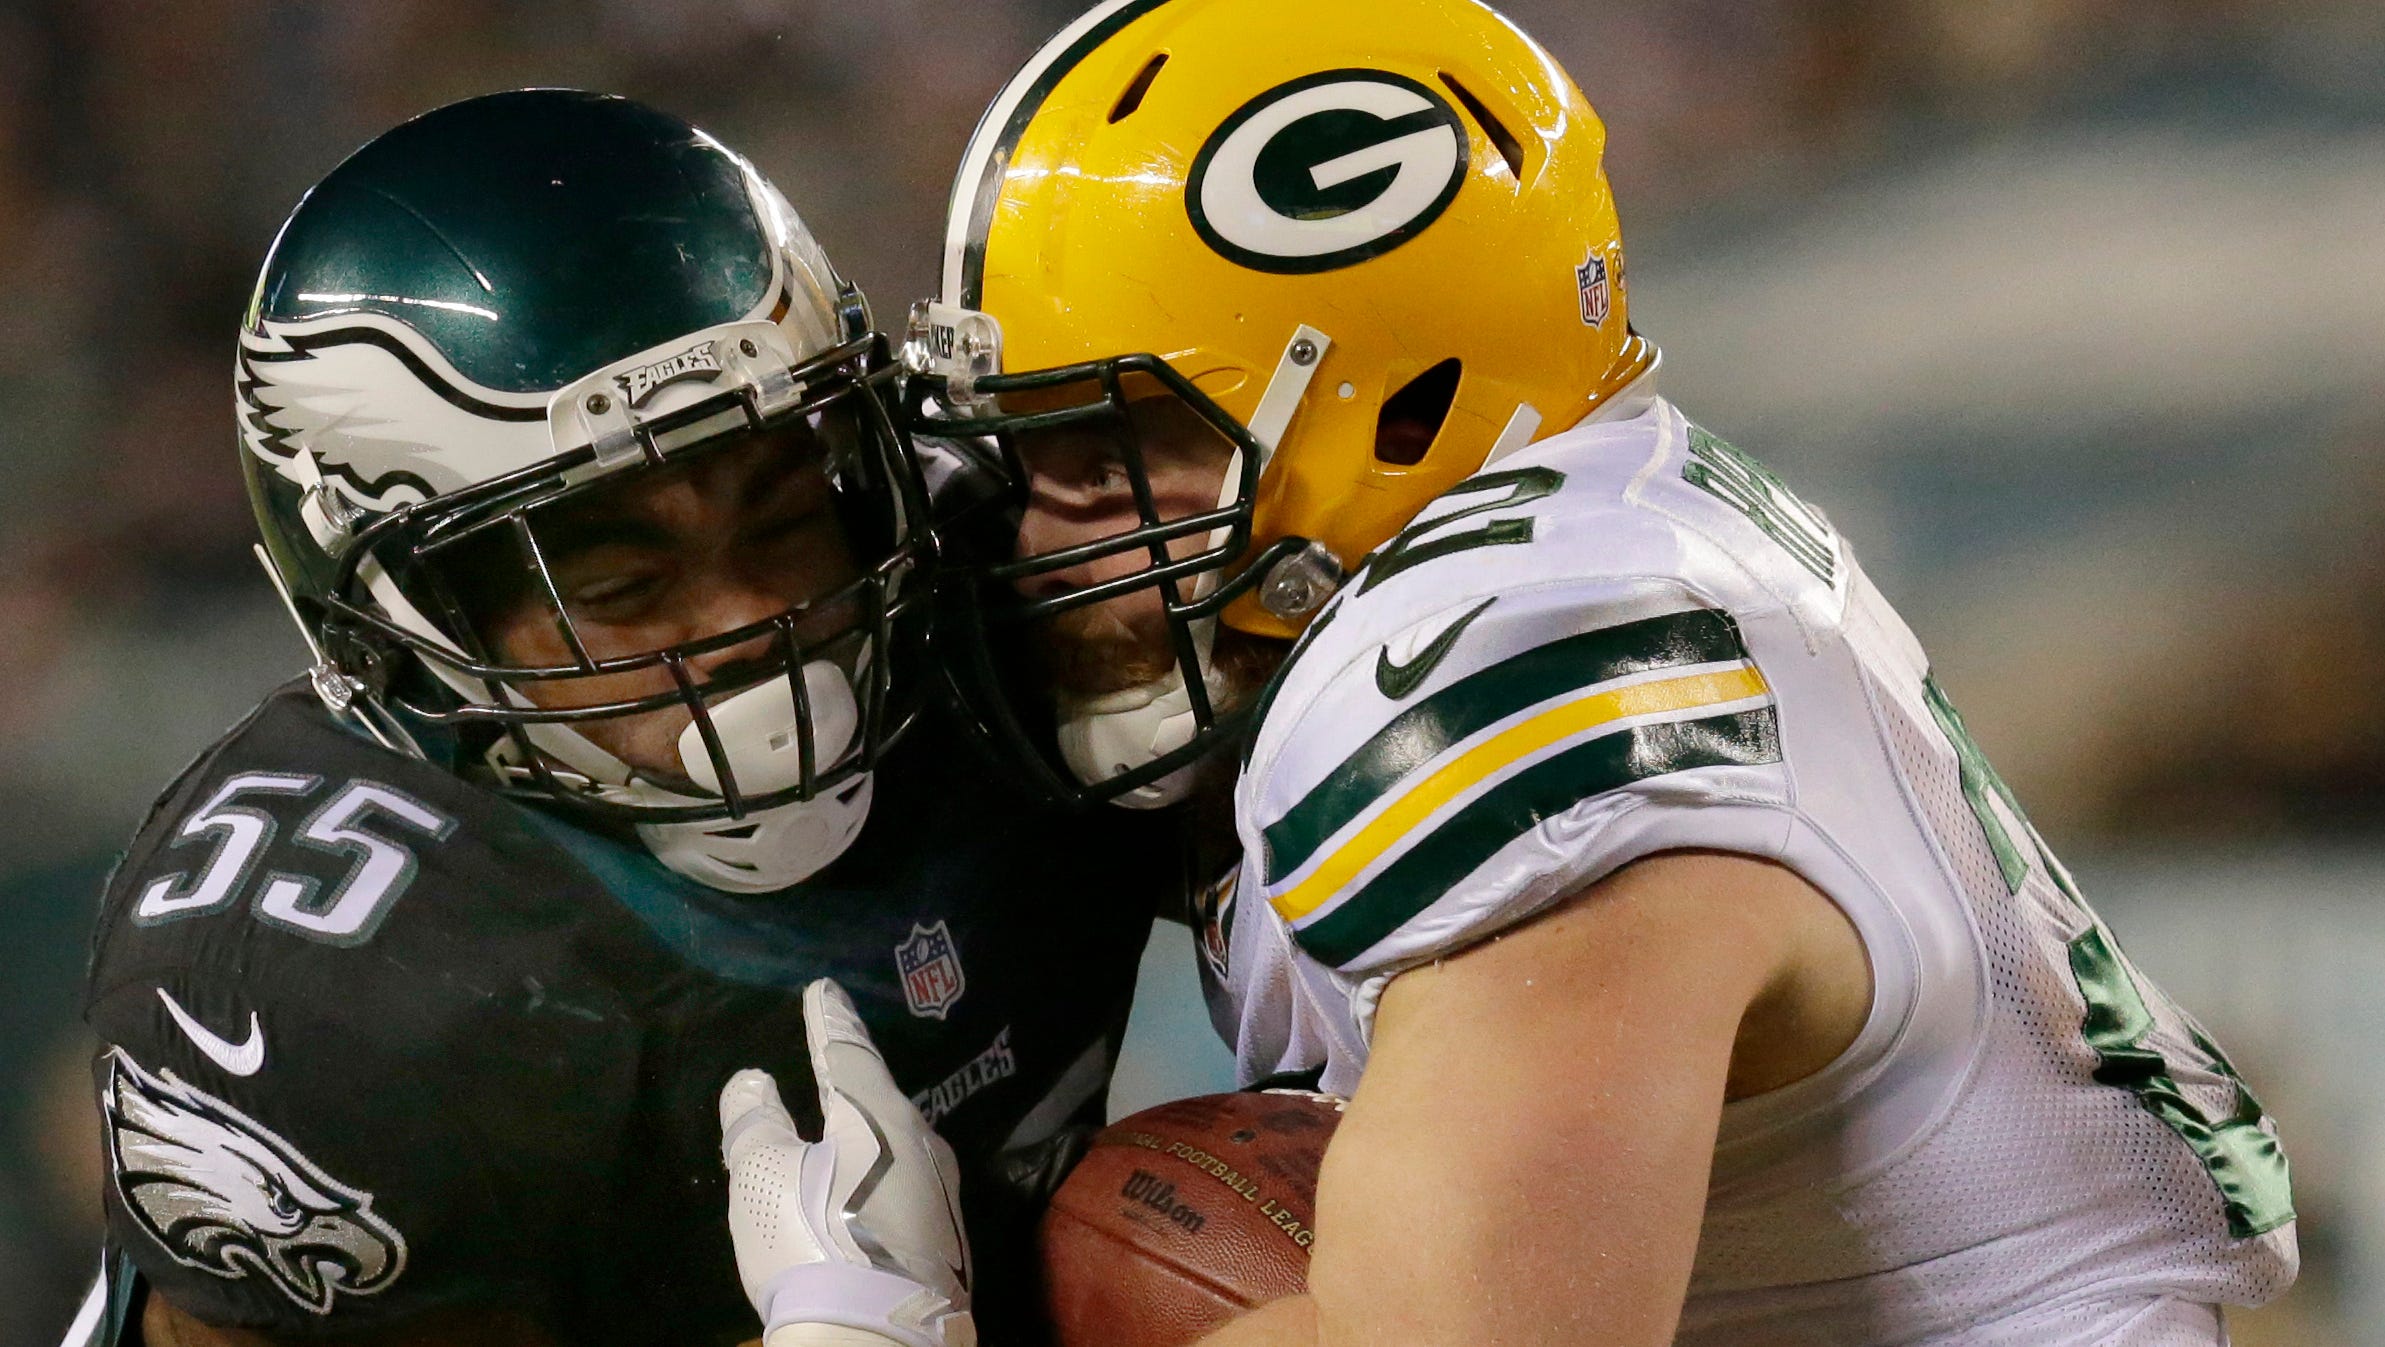 Fullback Aaron Ripkowski grinds out some yardage while being hit by Eagles defensive end Brandon Graham.